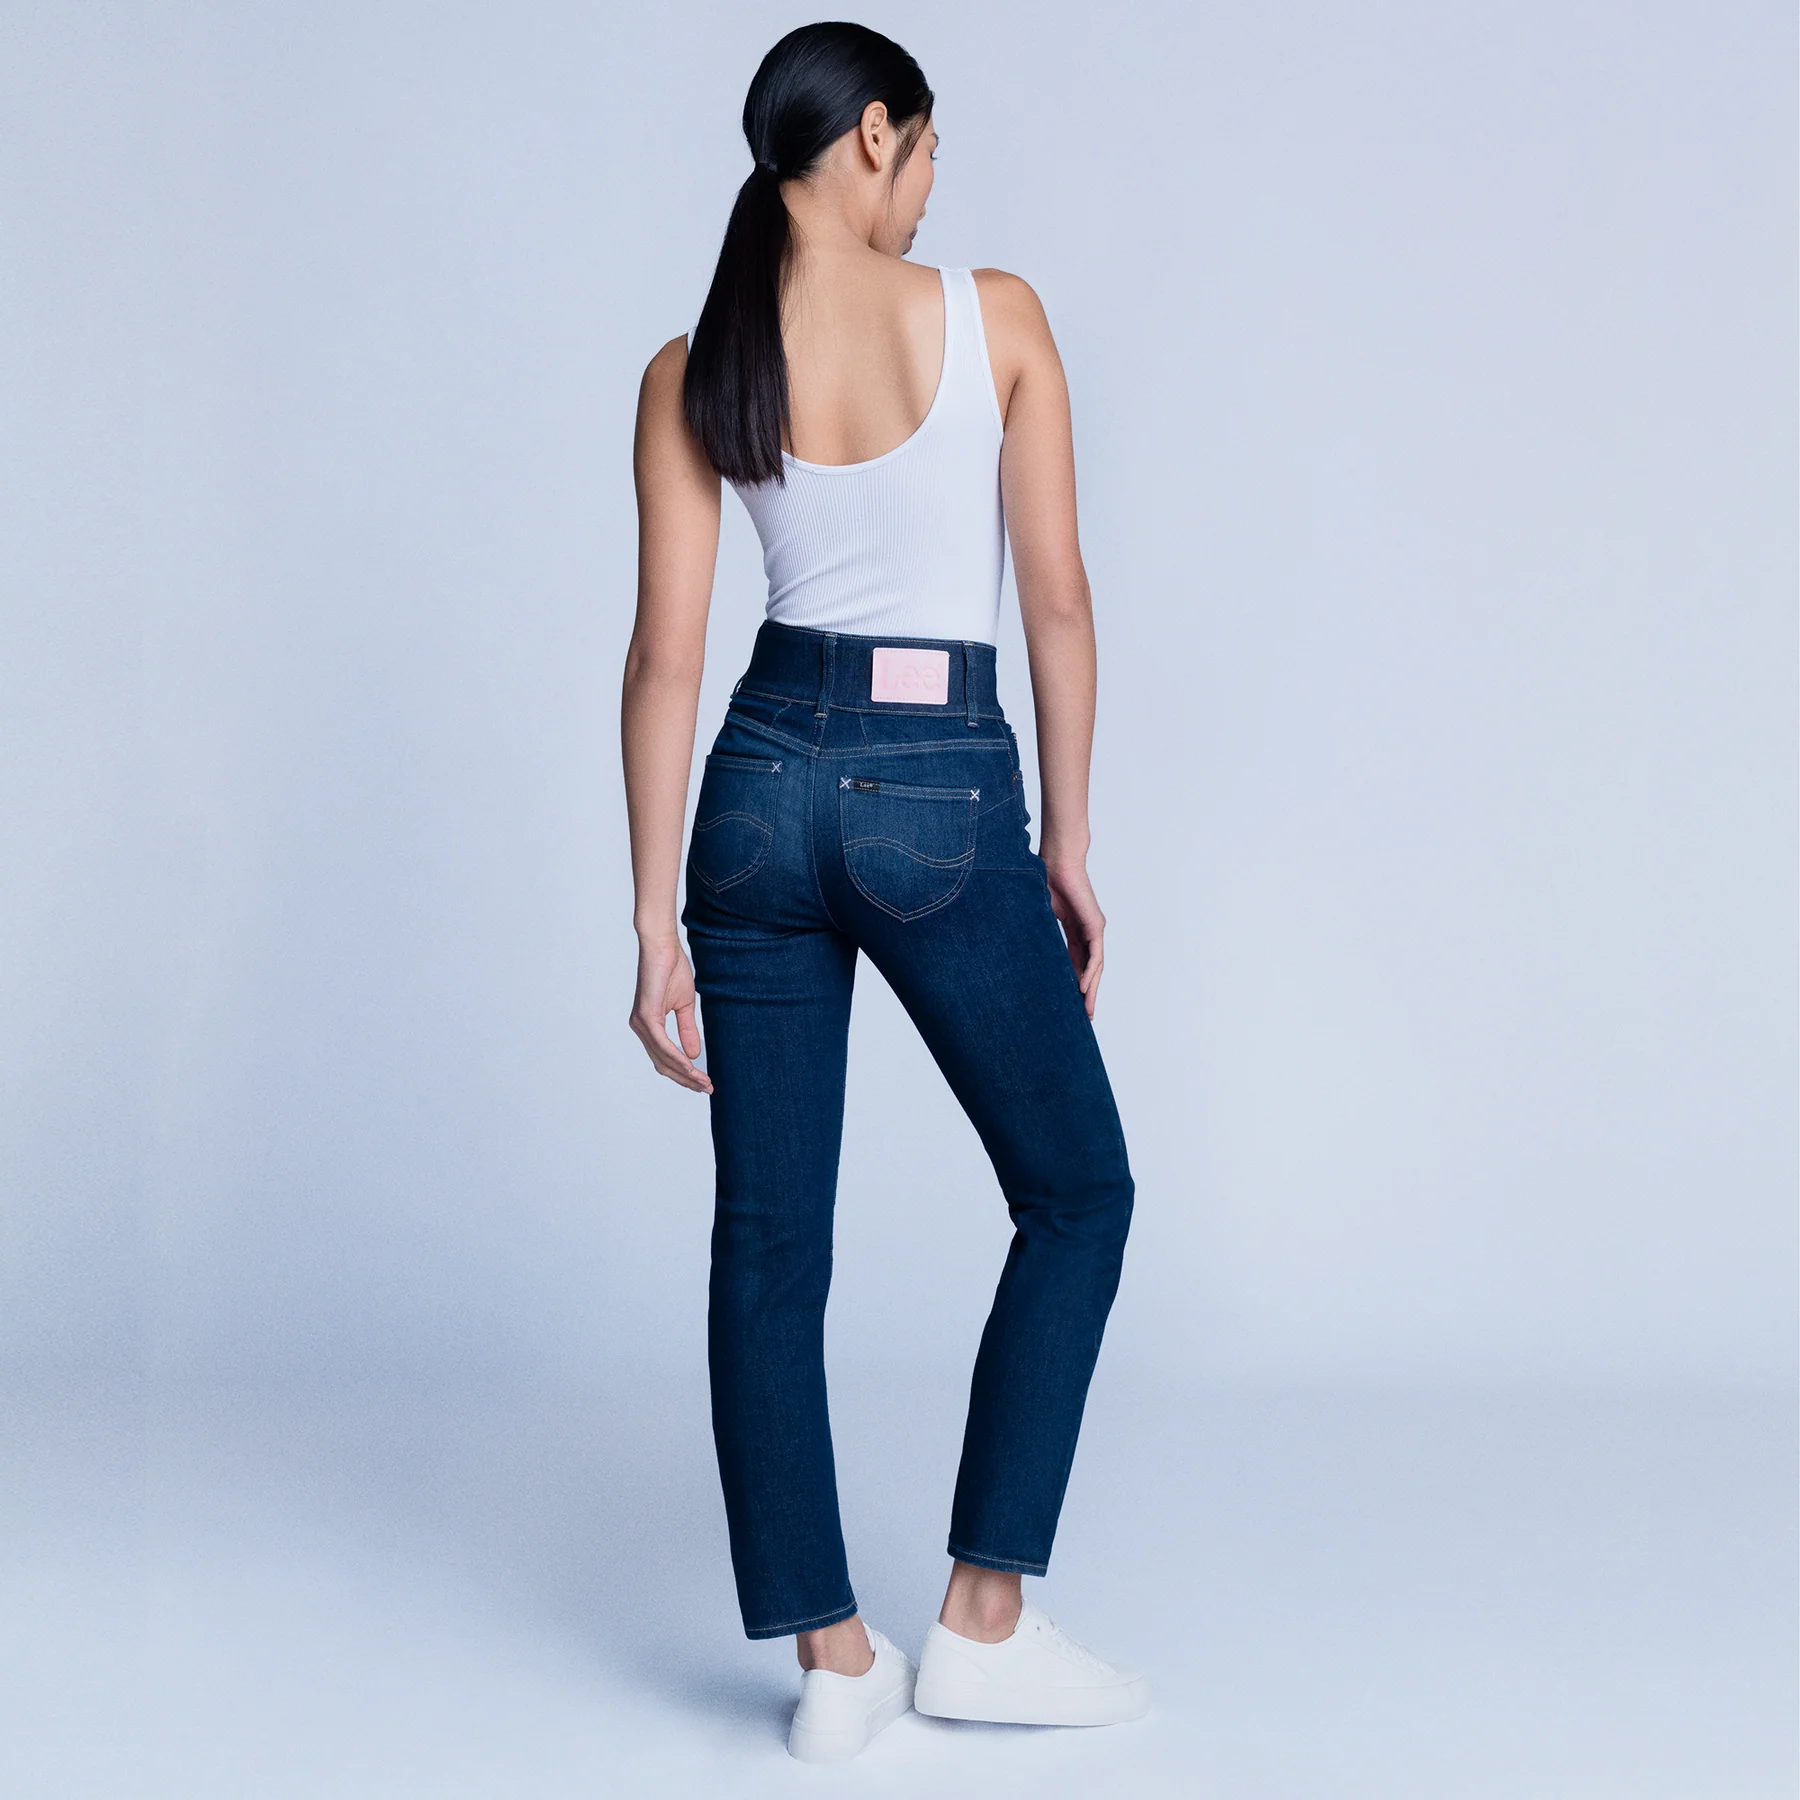 How to Find The Perfect Lee Jeans, According to Body Type